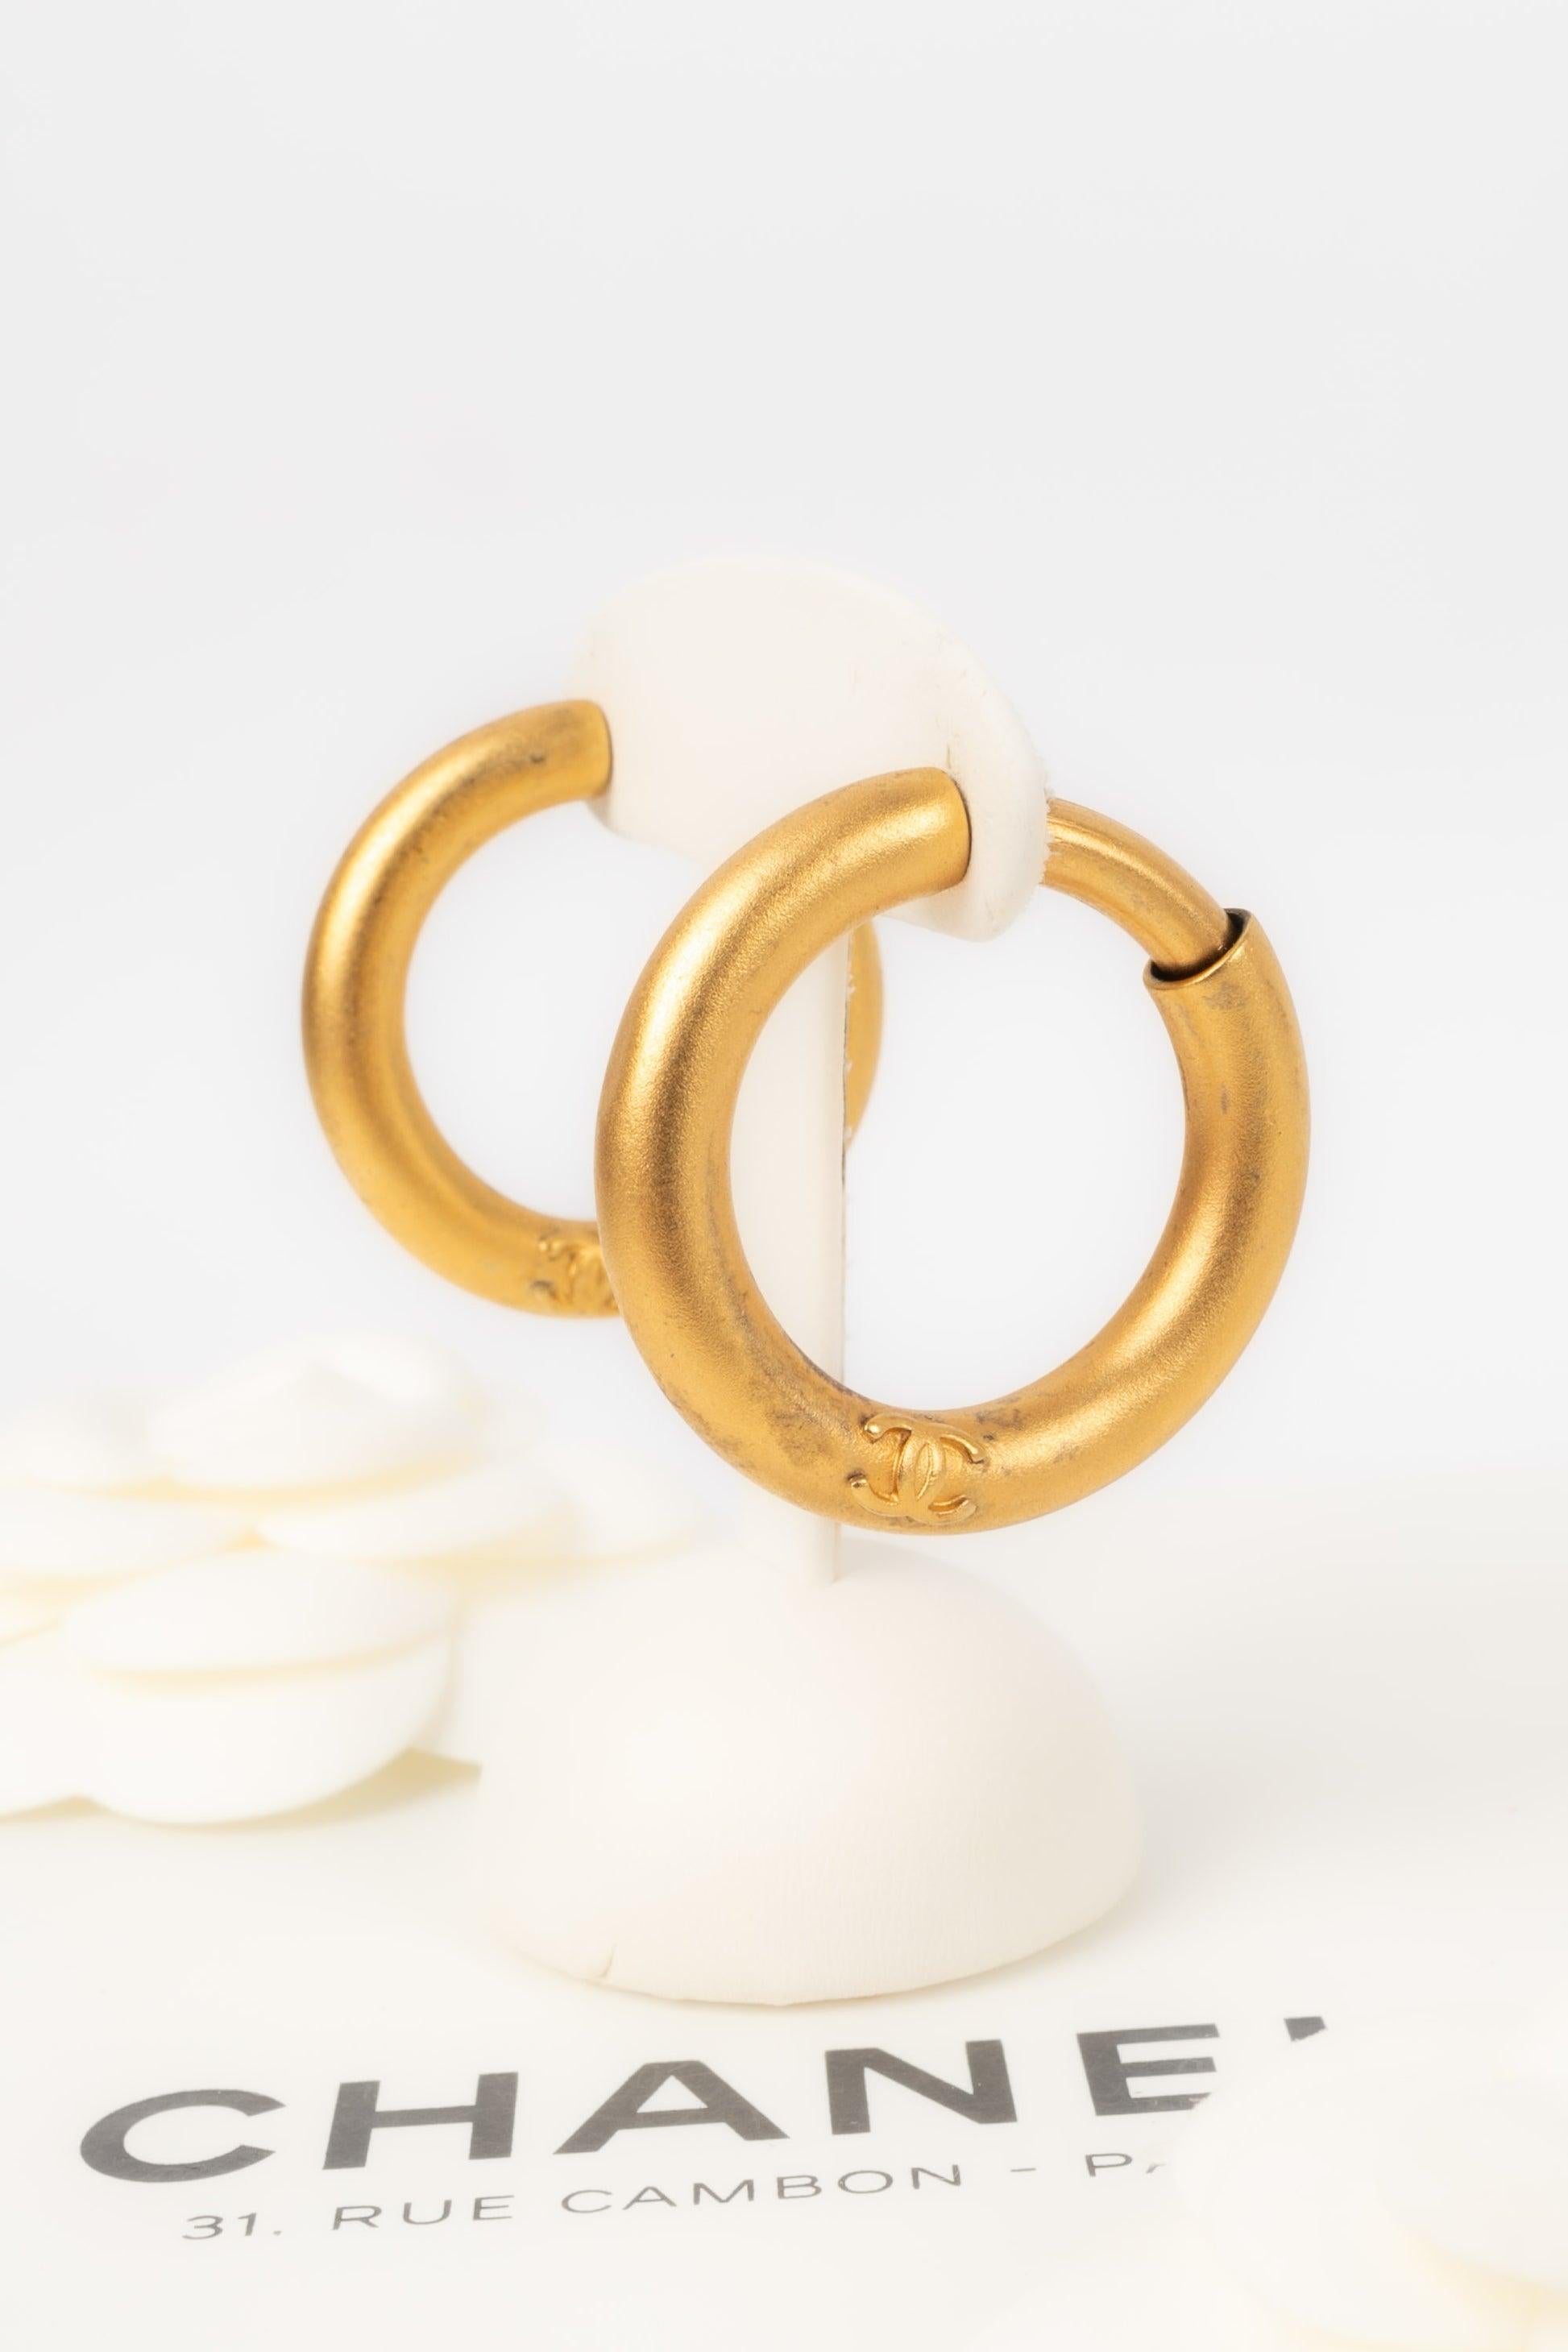 Chanel - (Made in France) Golden metal round earrings. Spring-Summer 1996 Collection.

Additional information:
Condition: Very good condition
Dimensions: Height: 3.5 cm

Seller Reference: BOB180